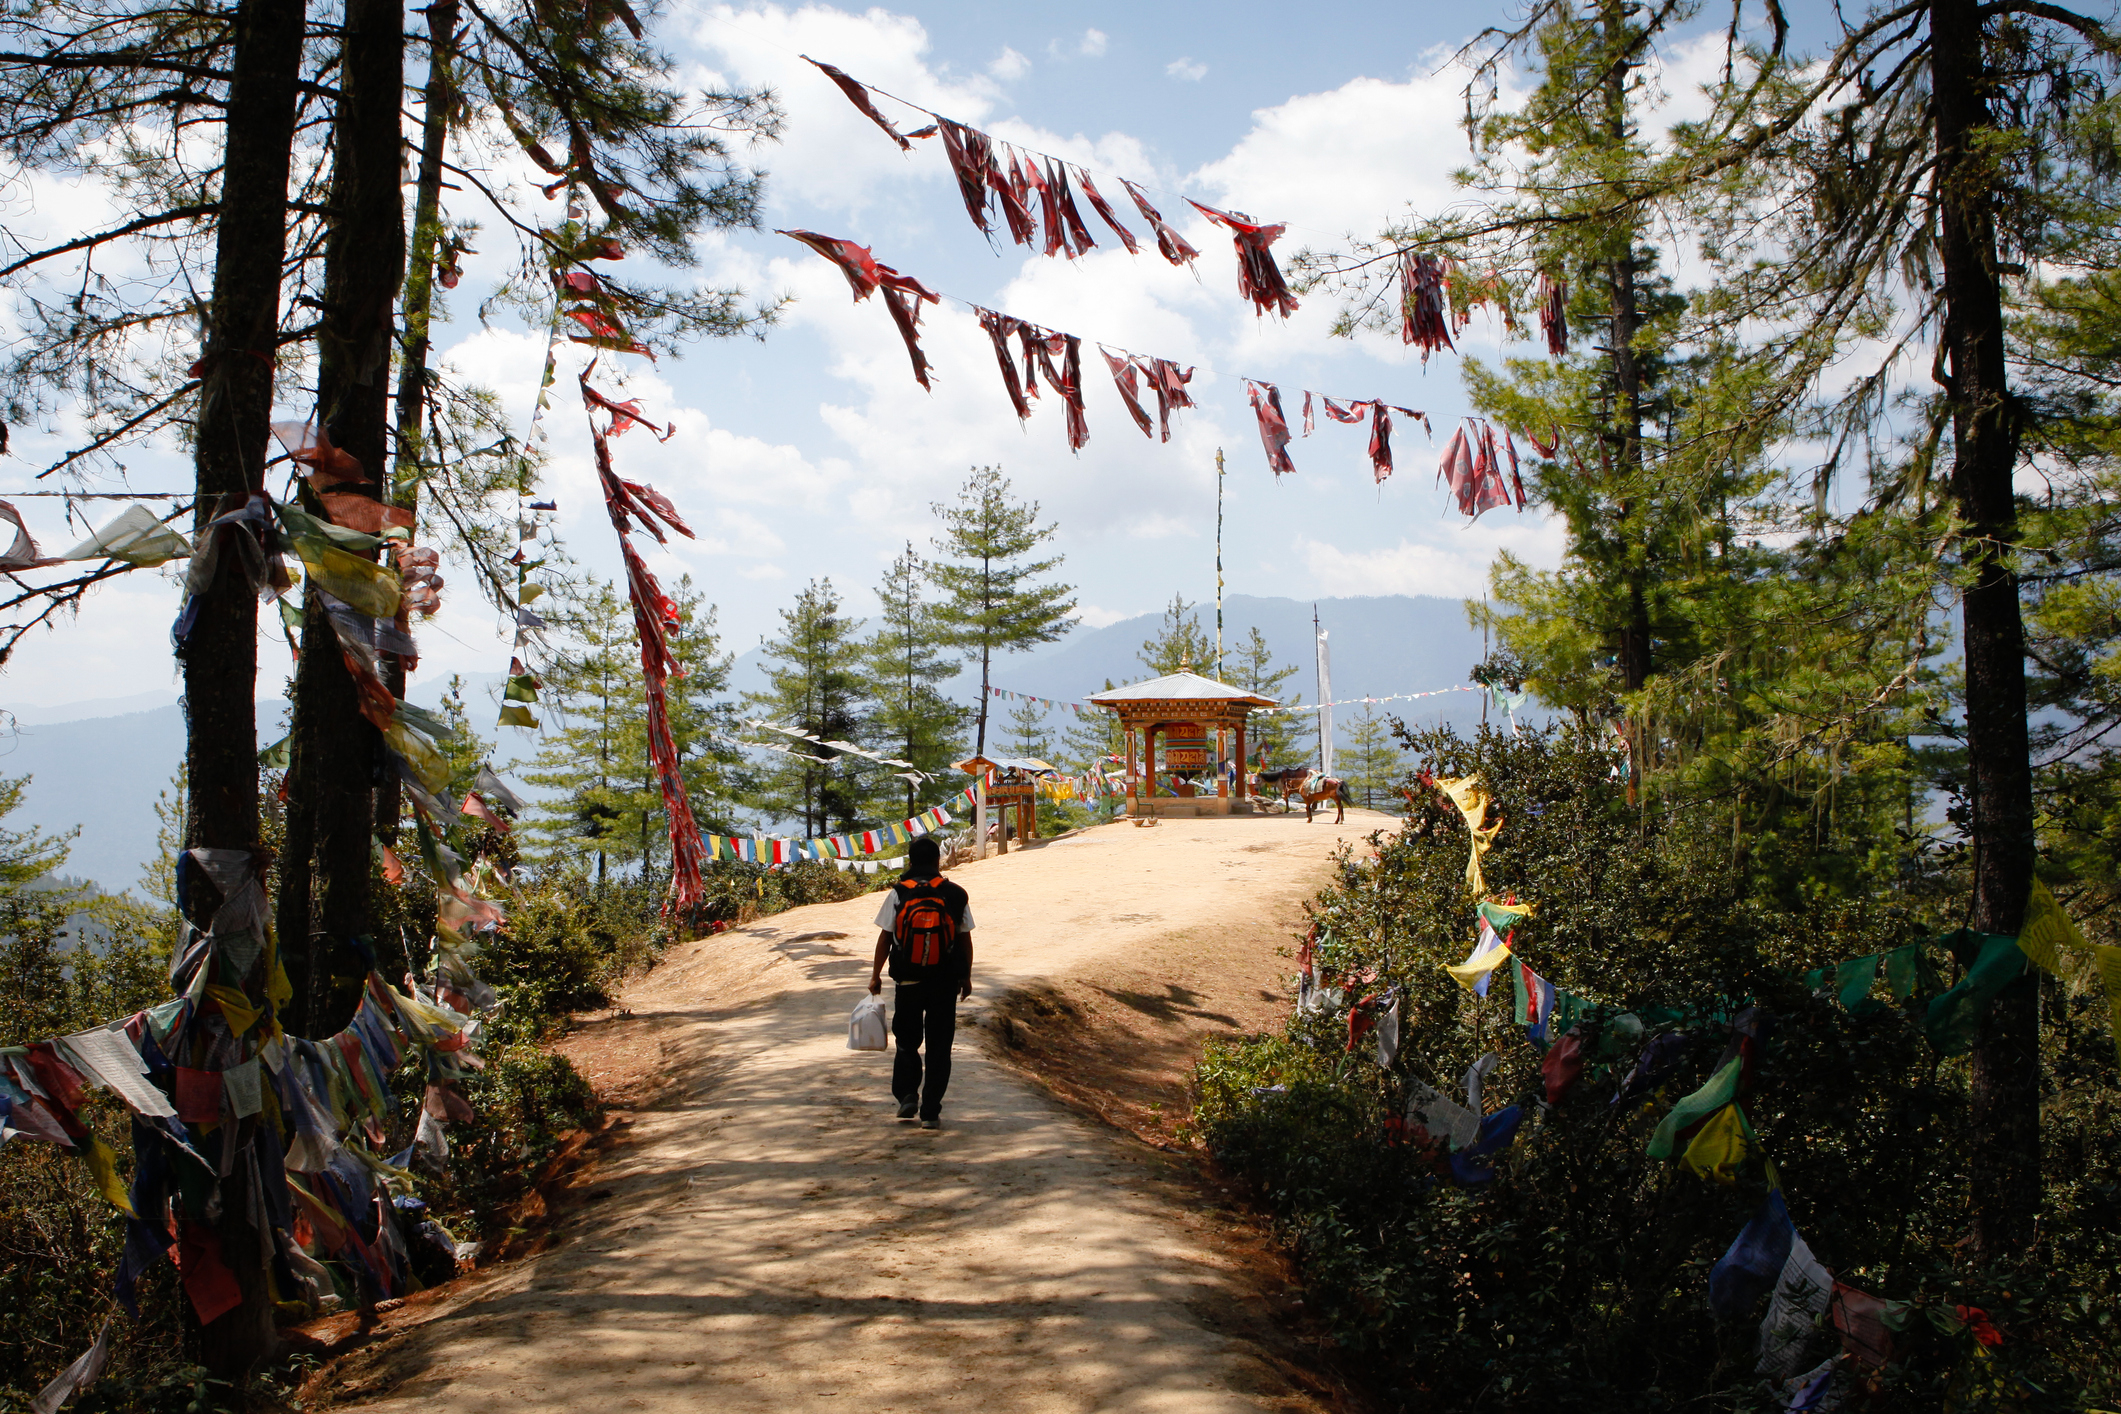 Person walking towards a small pavilion with prayer flags among trees, scenic outdoor setting